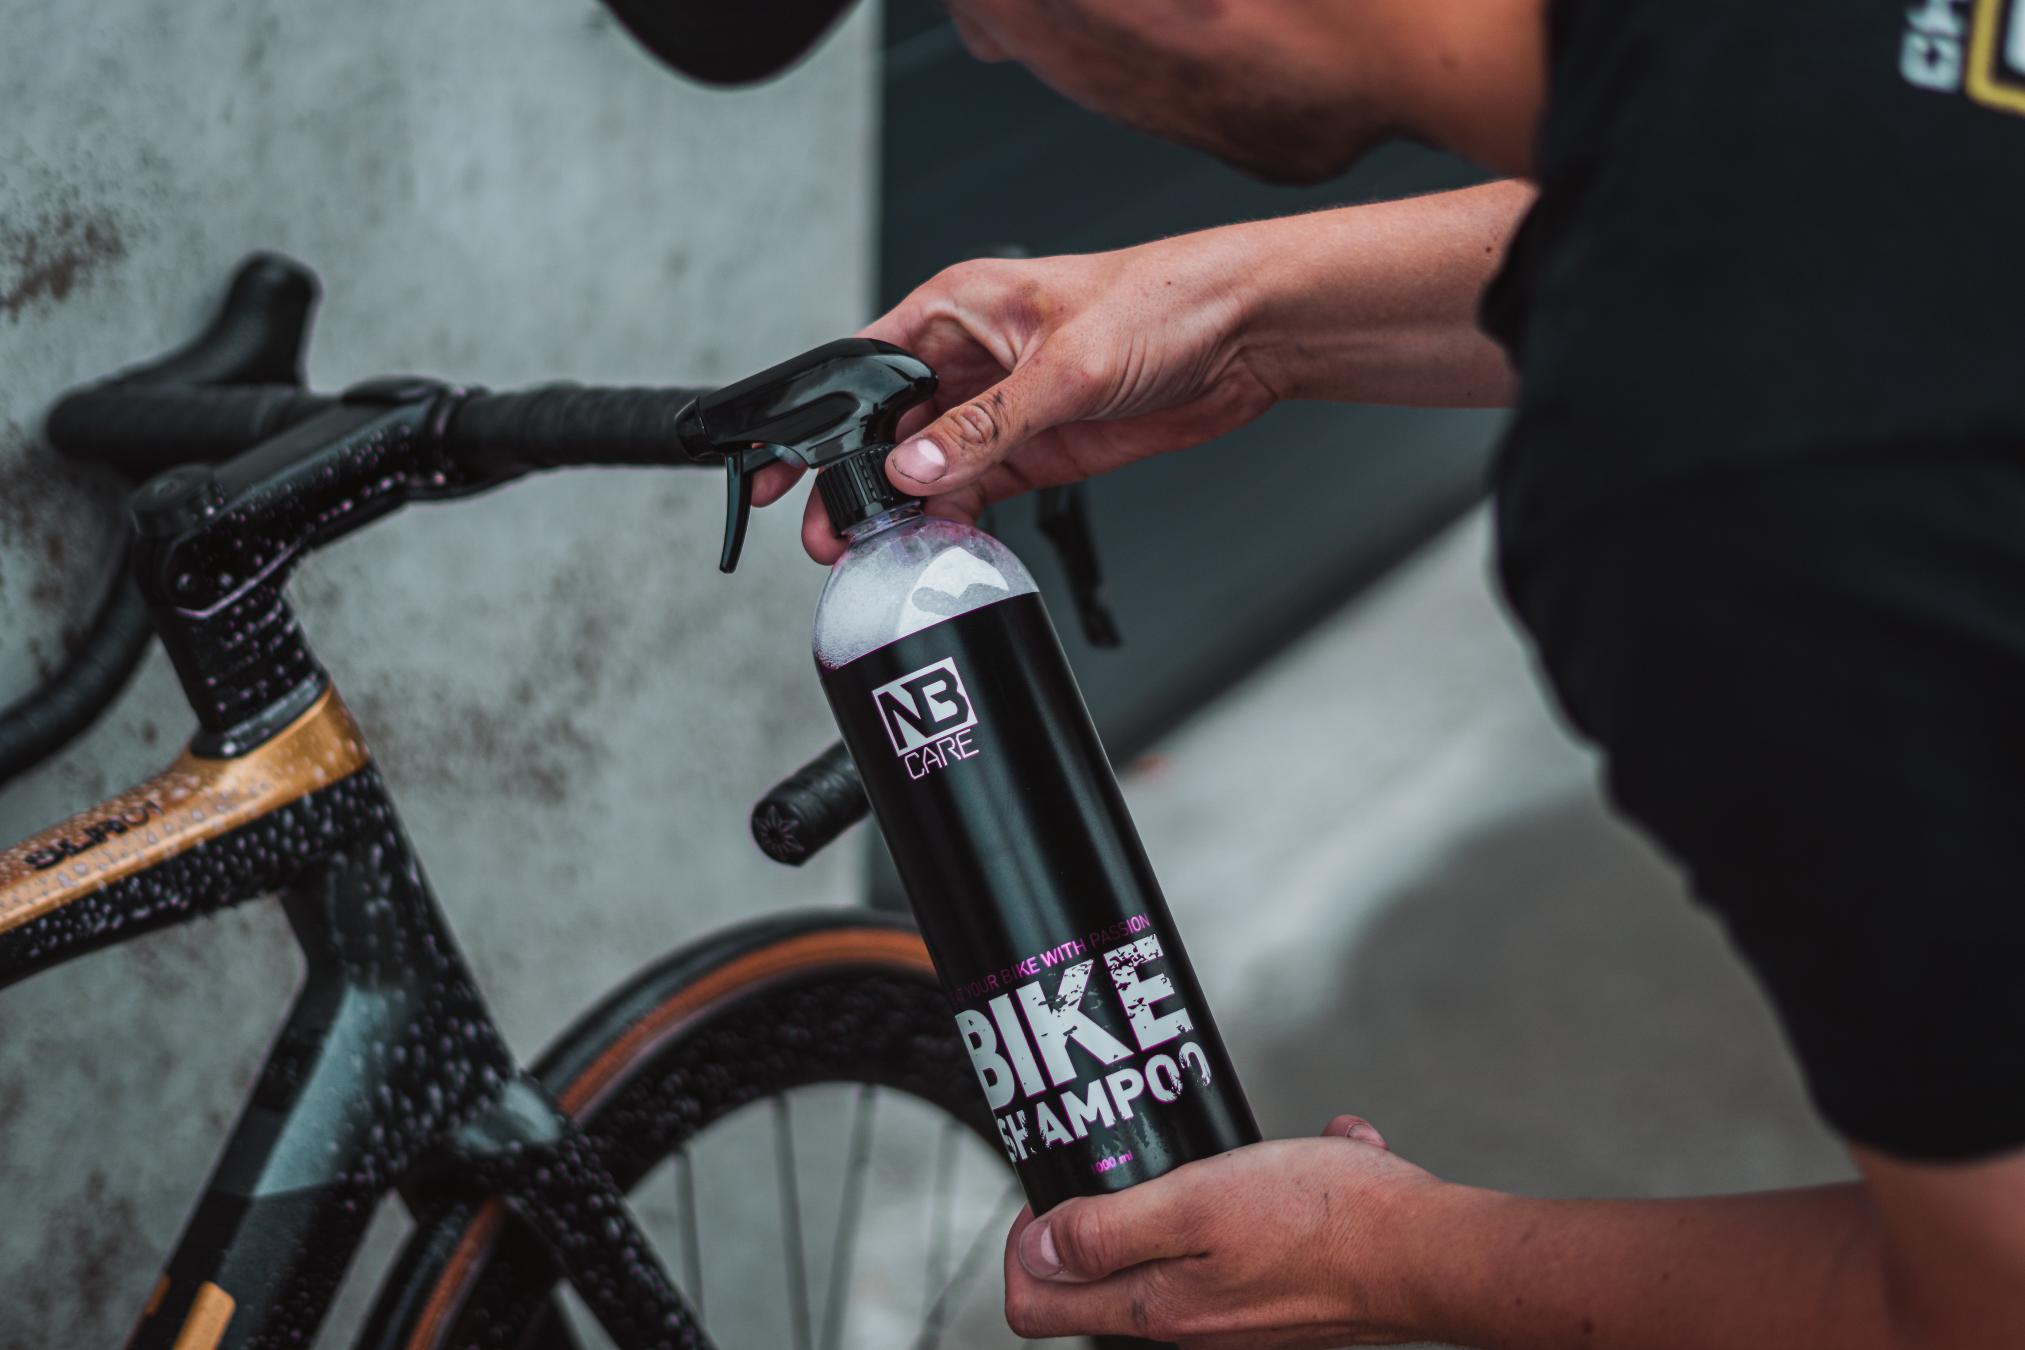 Cleansing product for bikes.